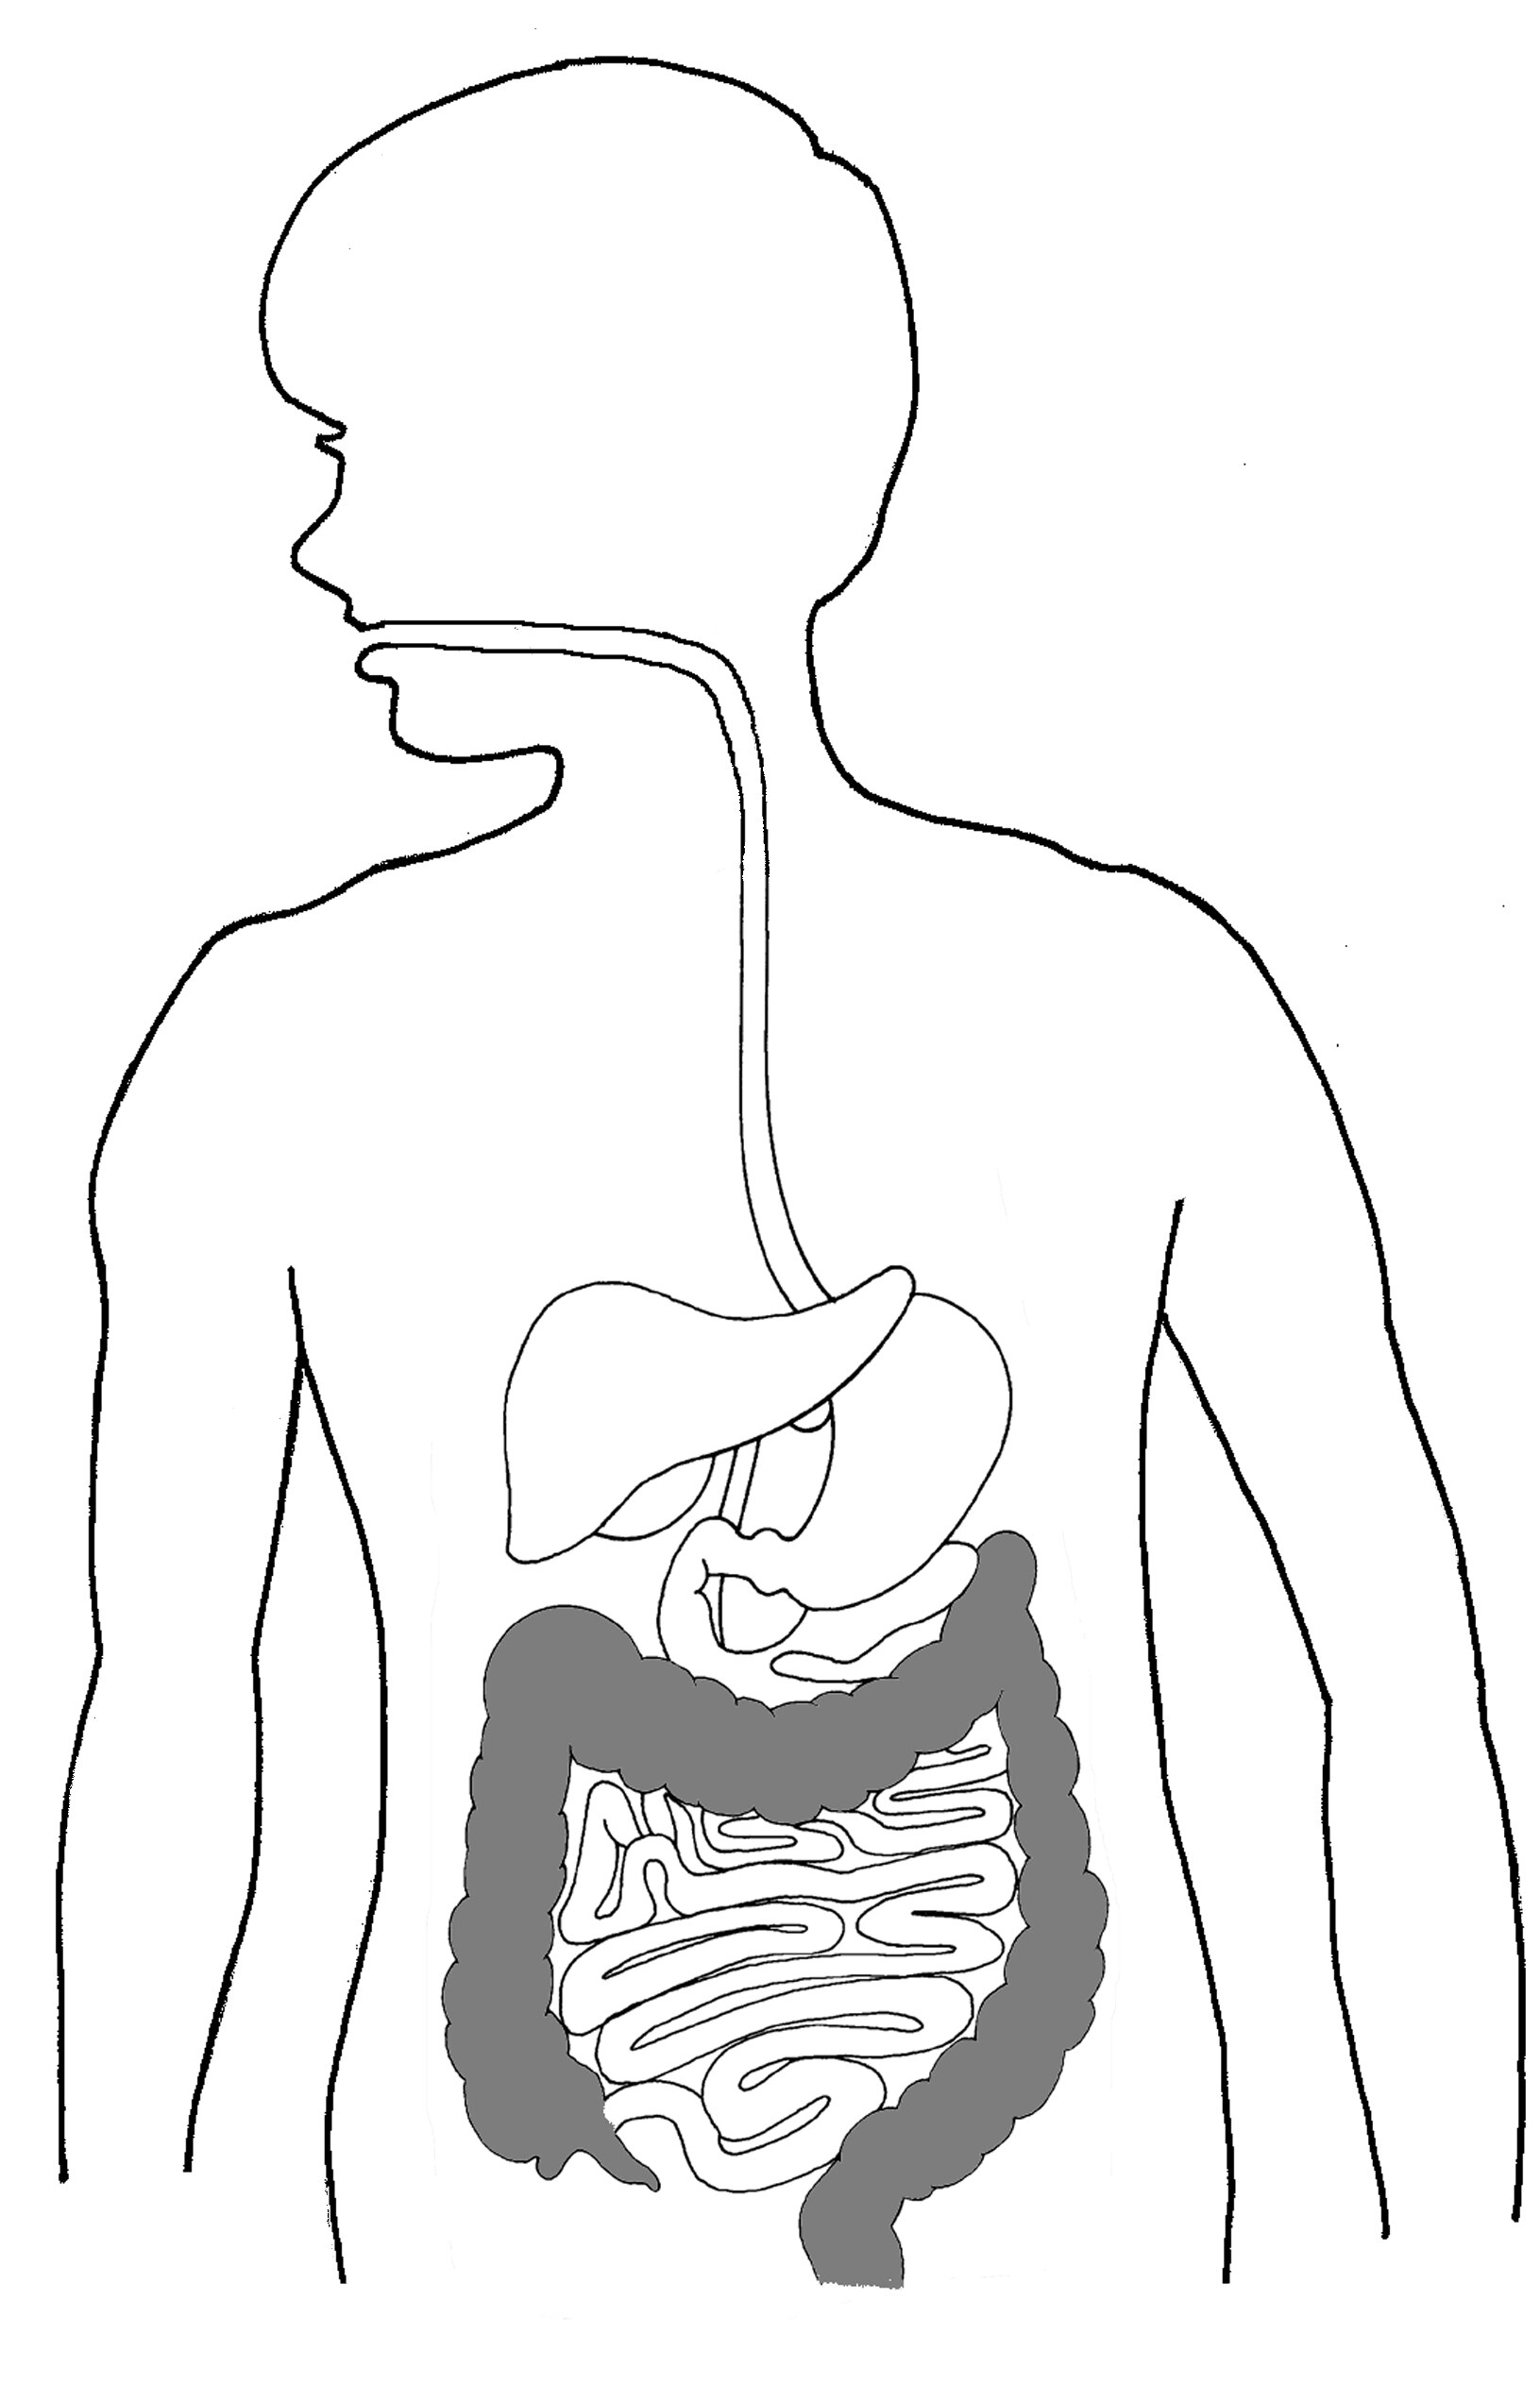 Belly Drawing Digestive System - Digestive System Diagram - Free  Transparent PNG Download - PNGkey